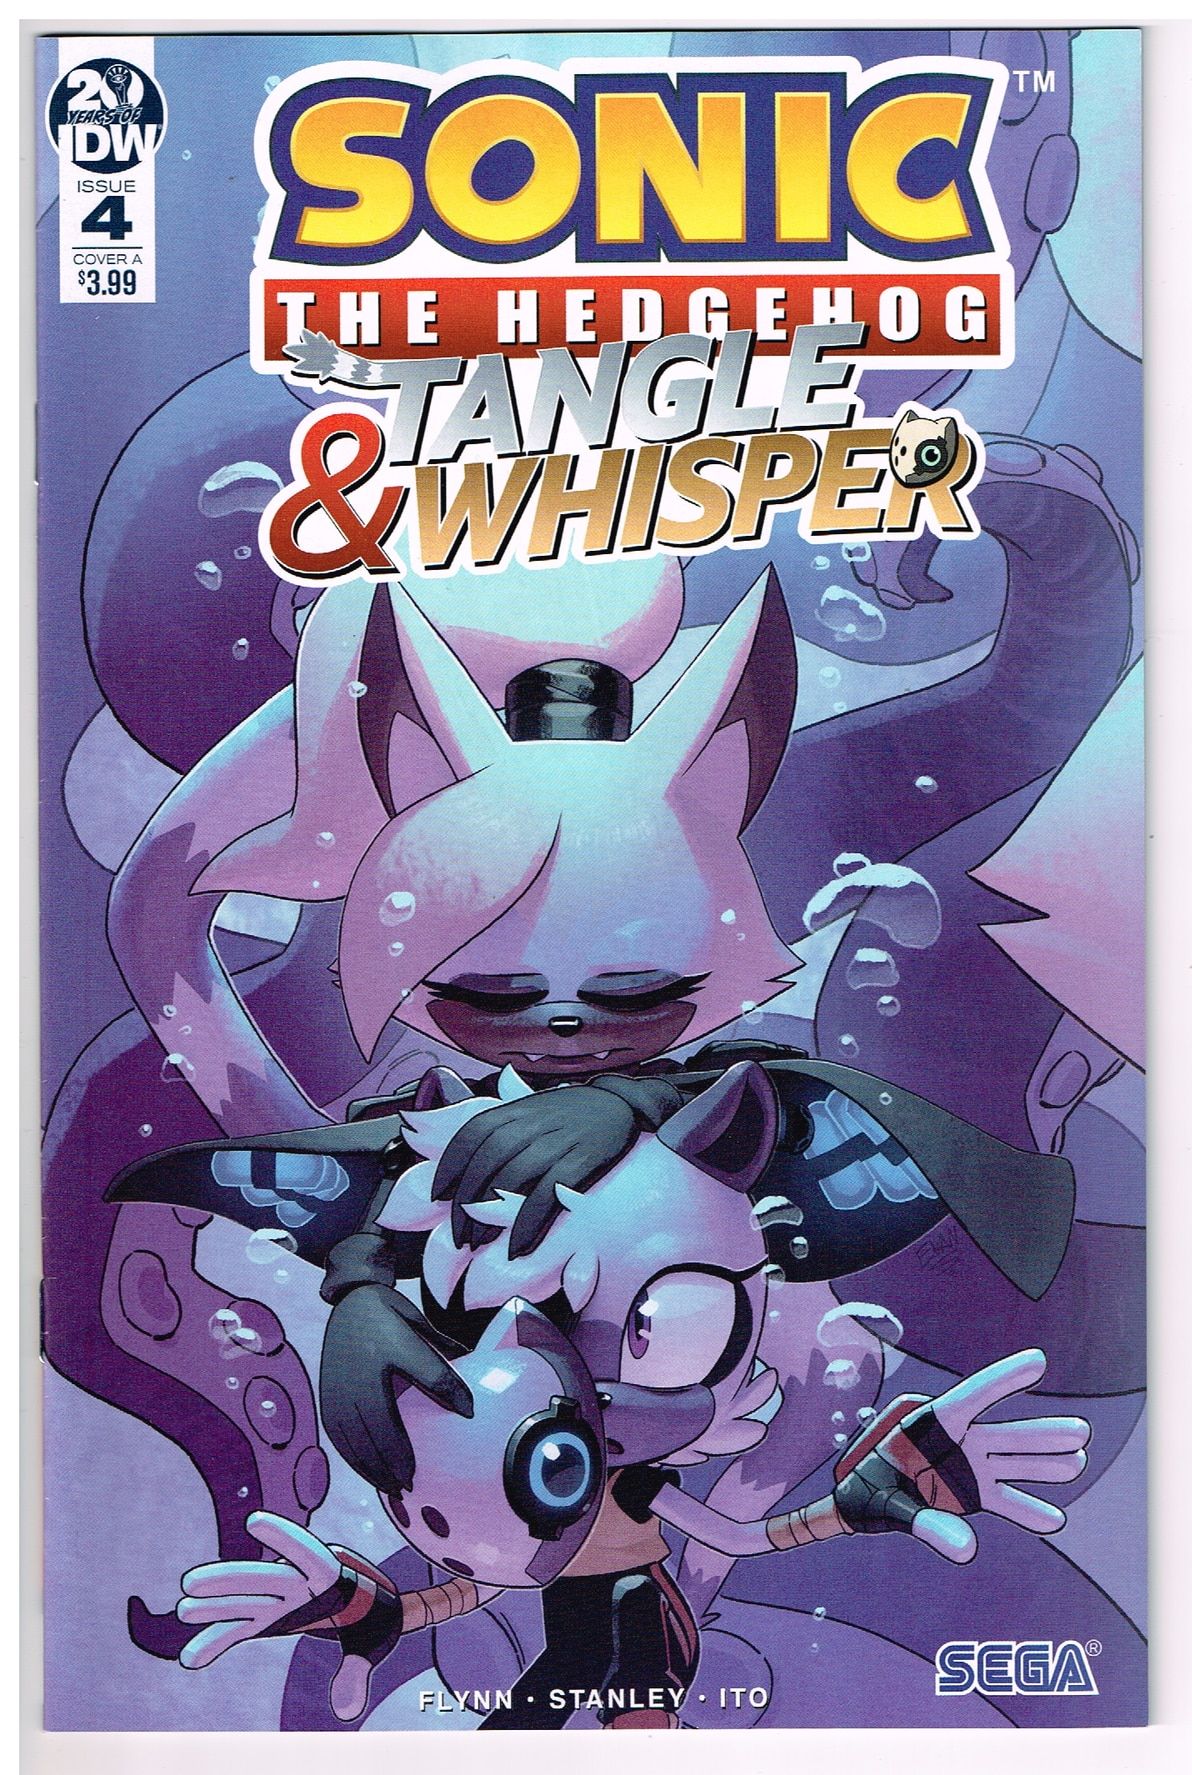 Whisper Cover A NM 2019 IDW 35vault35.com · In stock